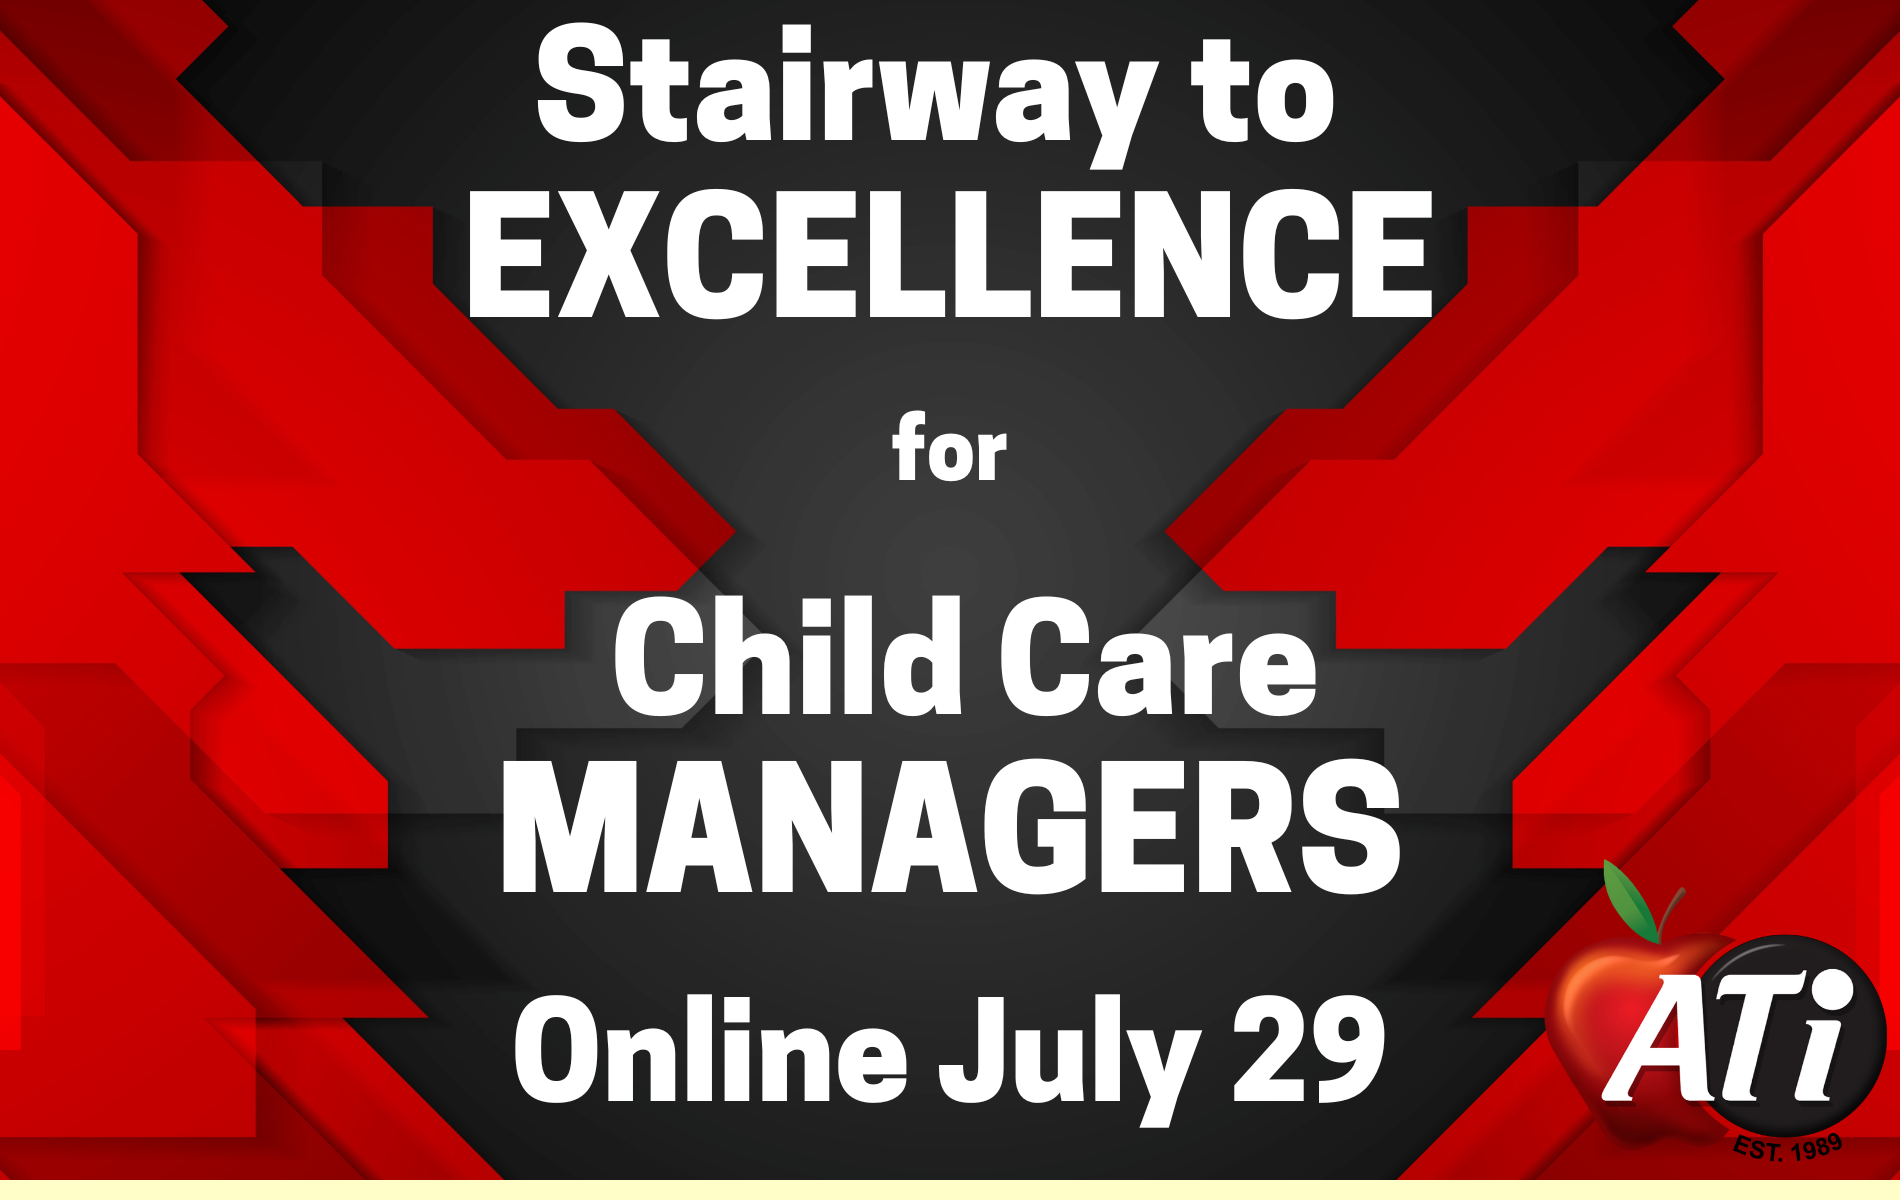 Stairway to Excellence for Child Care Managers-Online - The